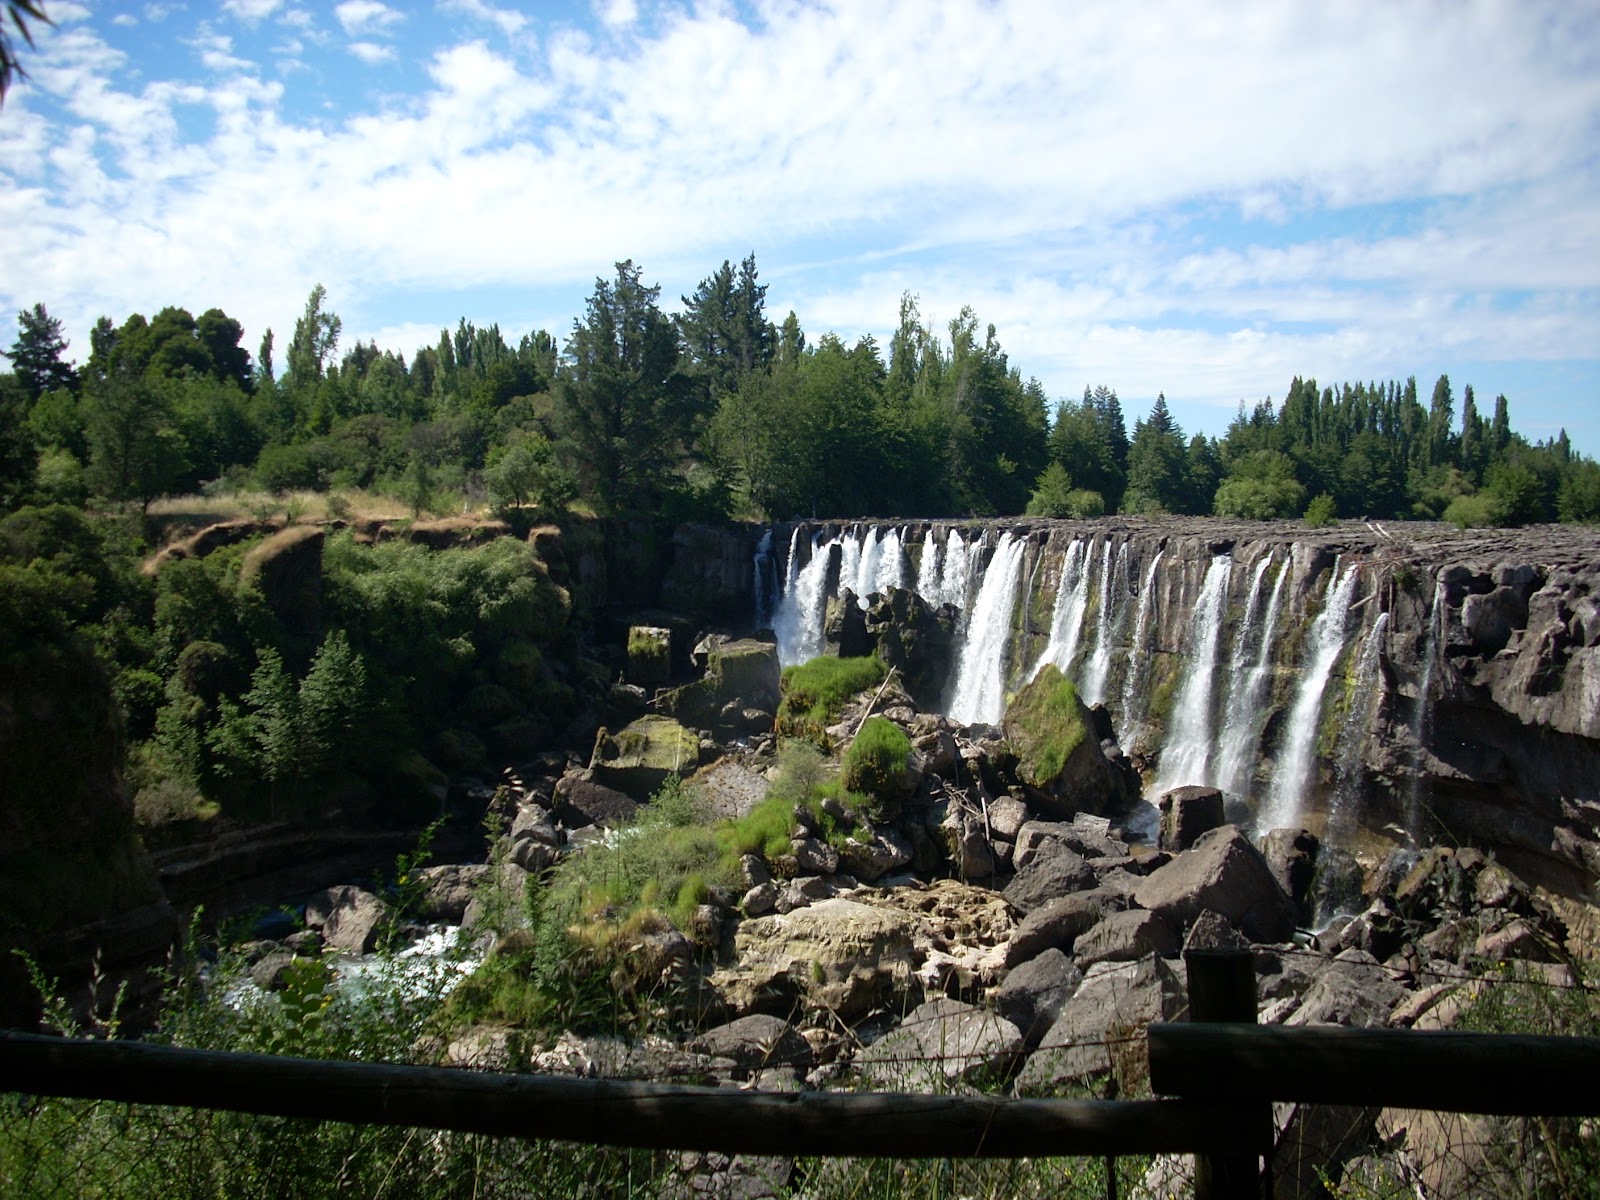 This was the view from my campsite. Unfortunately they don't turn the falls off at night, so it was a little noisy.